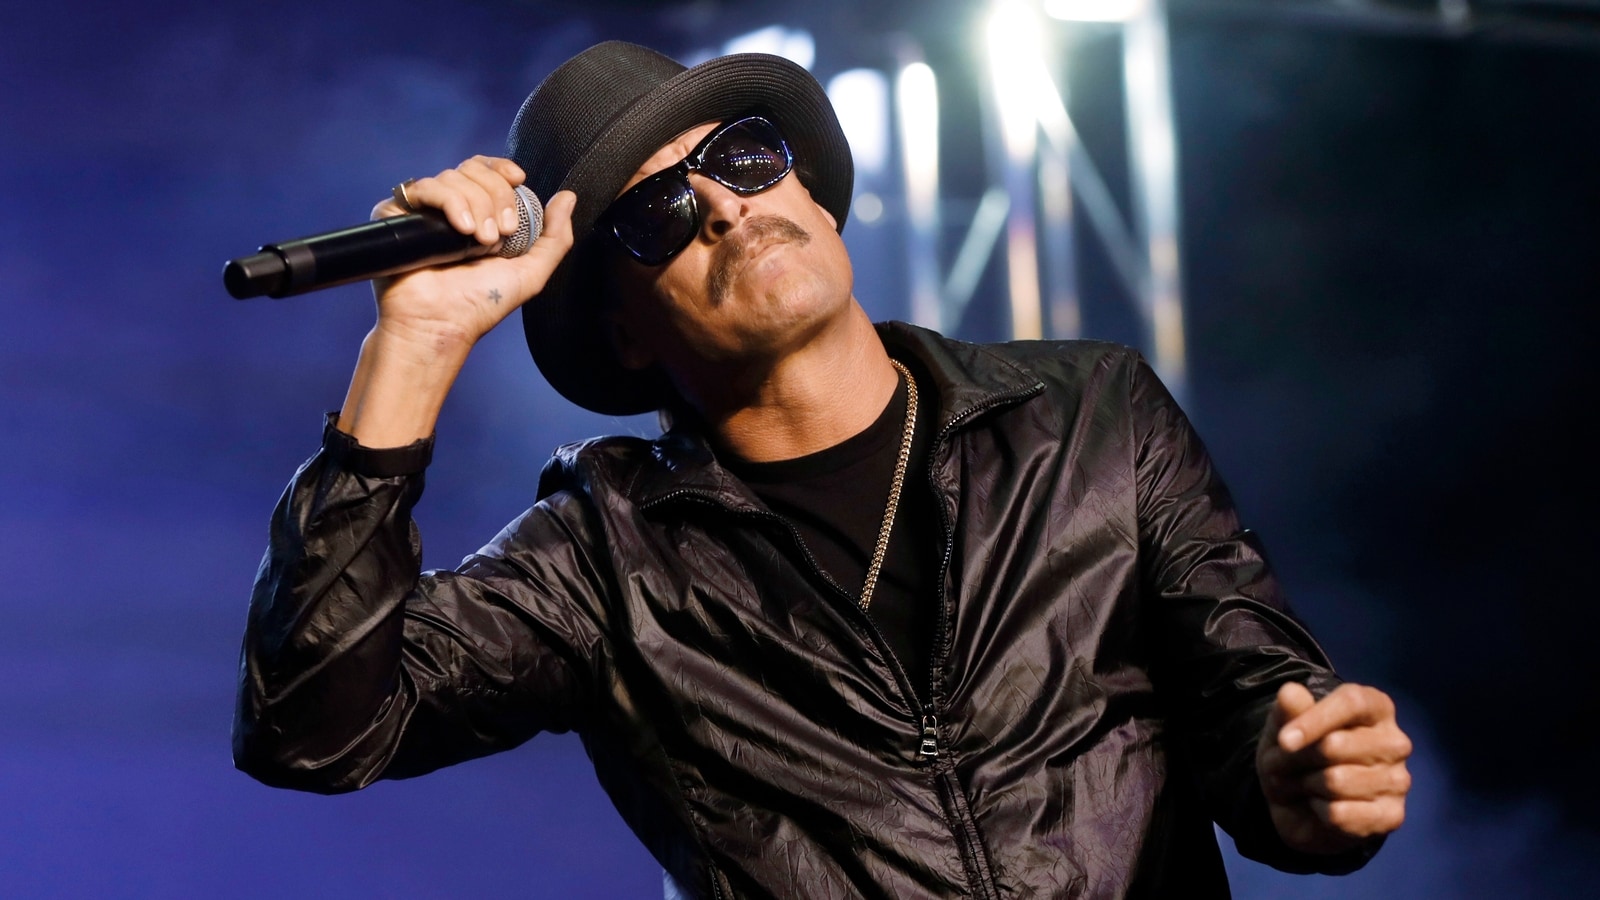 Kid Rock brandishes a gun and uses N-word several times in a shocking interview to Rolling Stone